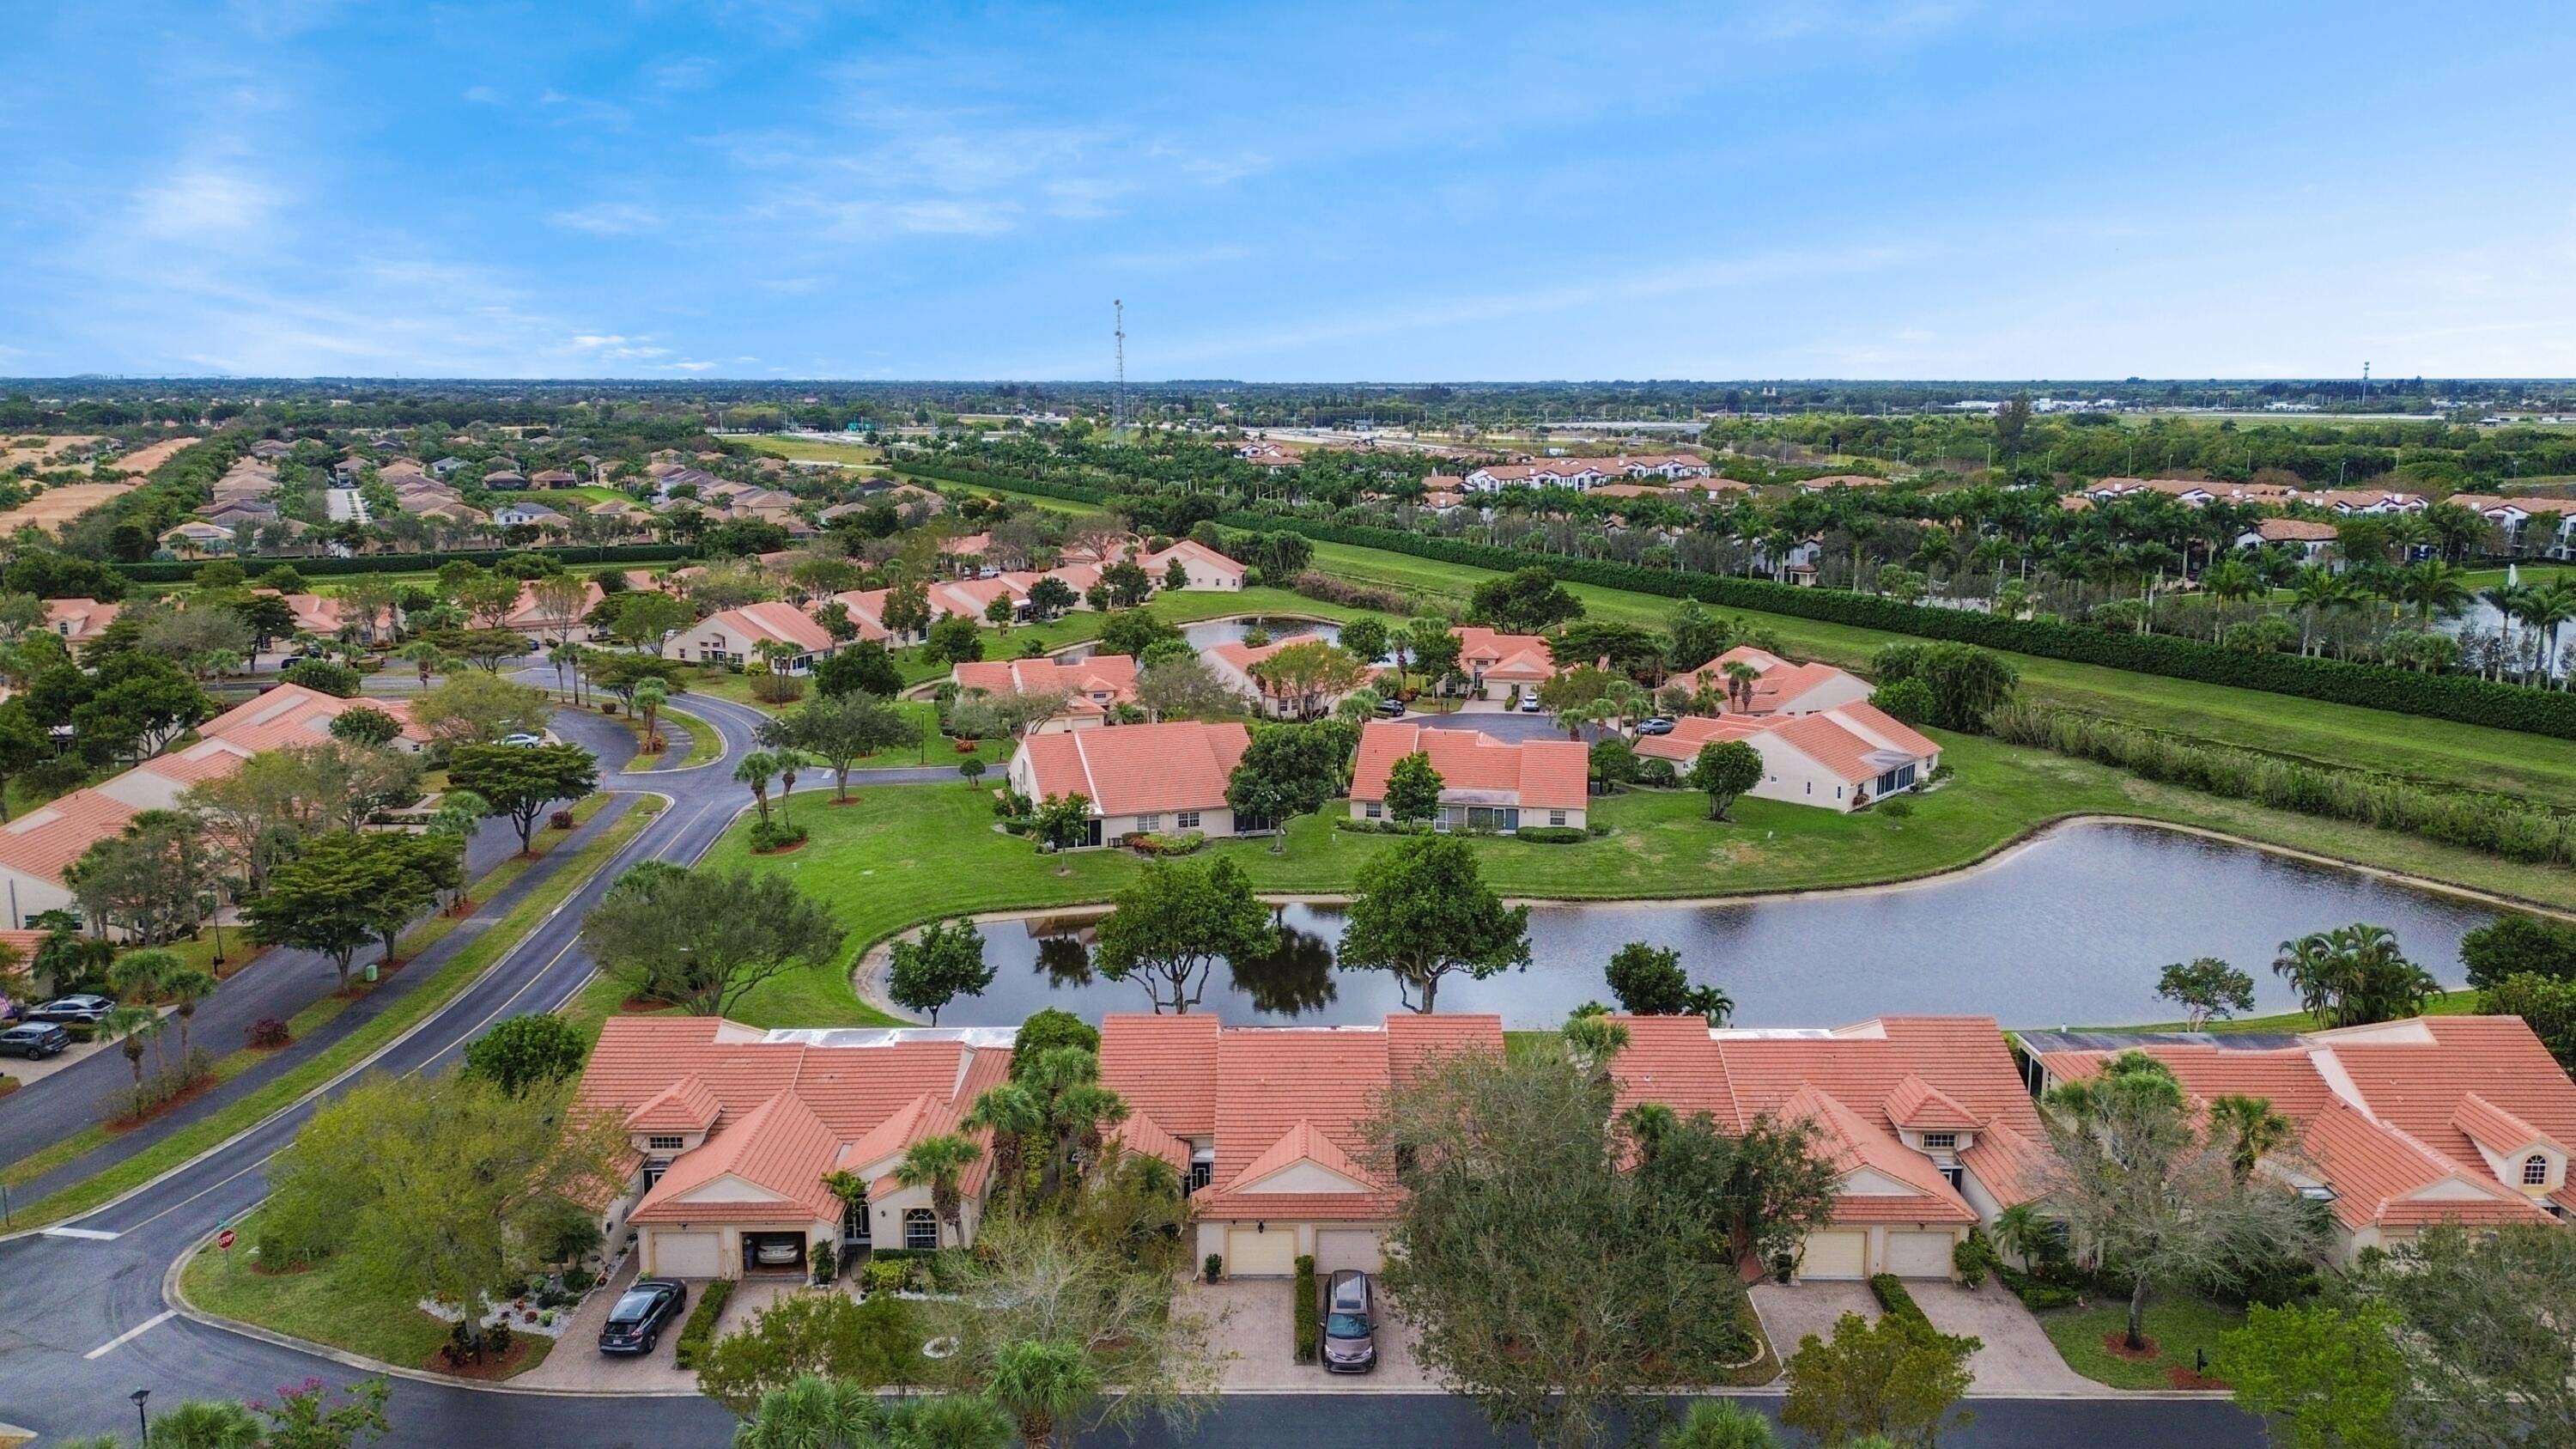 Welcome to this exquisite 2 bedroom, 2 bathroom villa nestled in thecoveted community of Emerald Point, Boynton Beach, Florida.